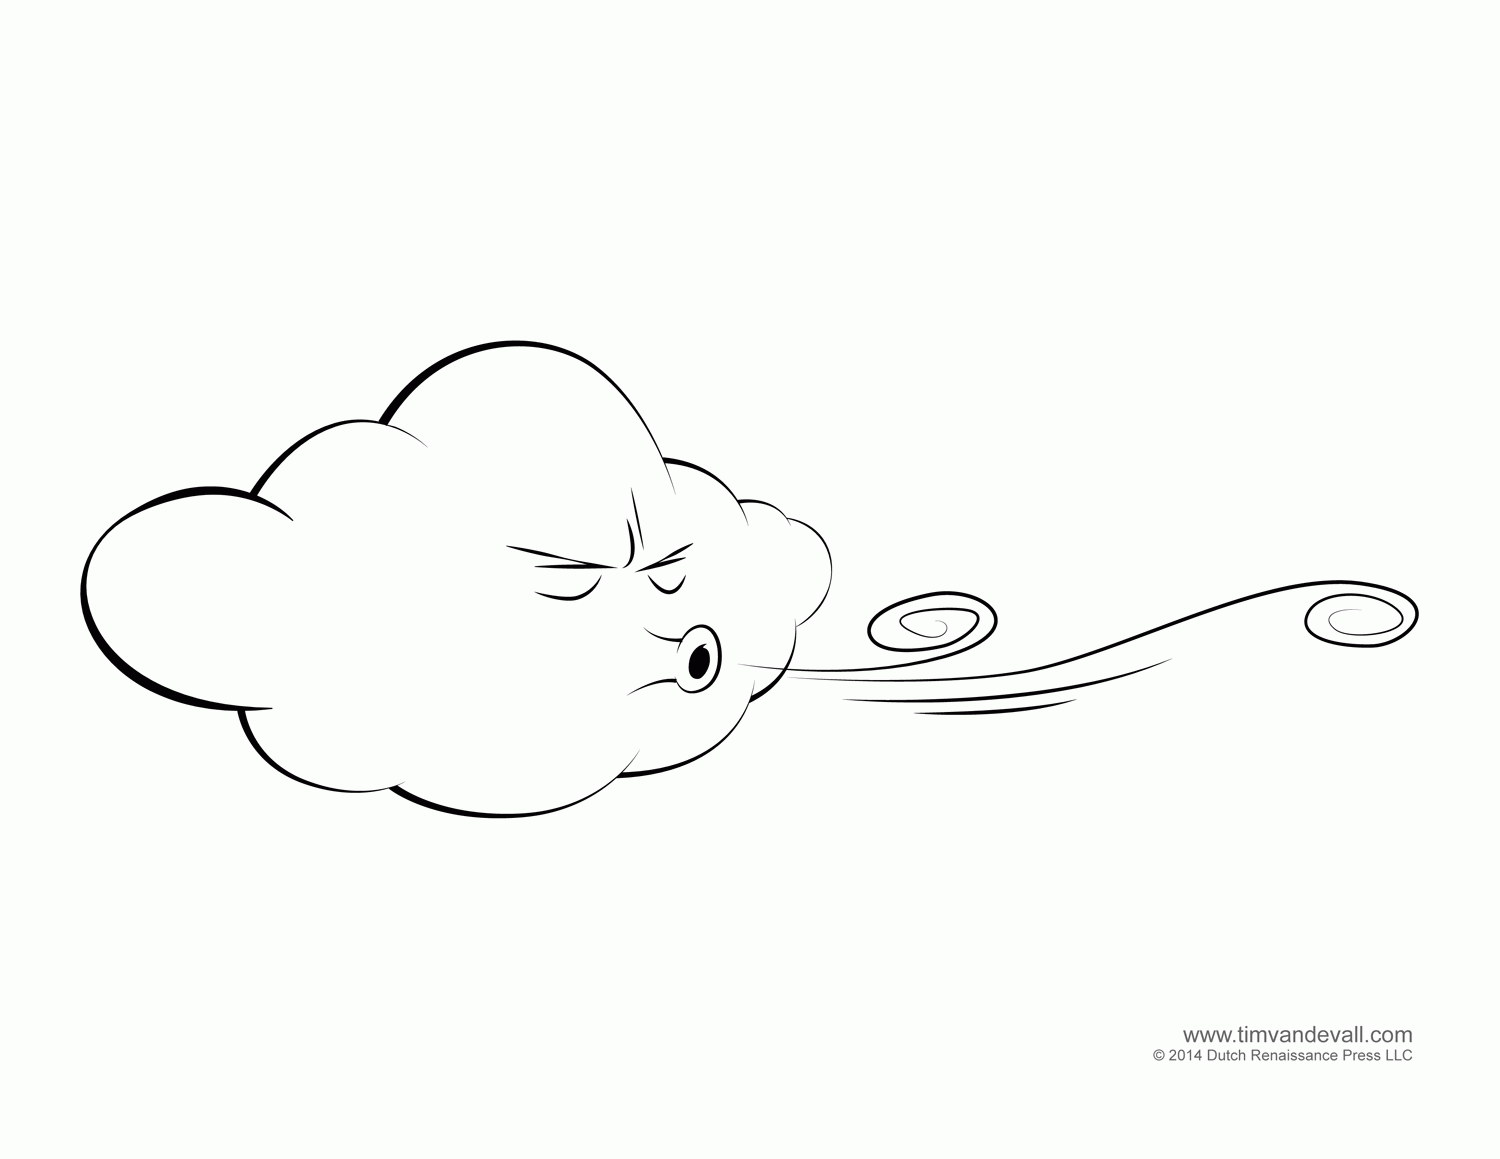 windy day coloring page